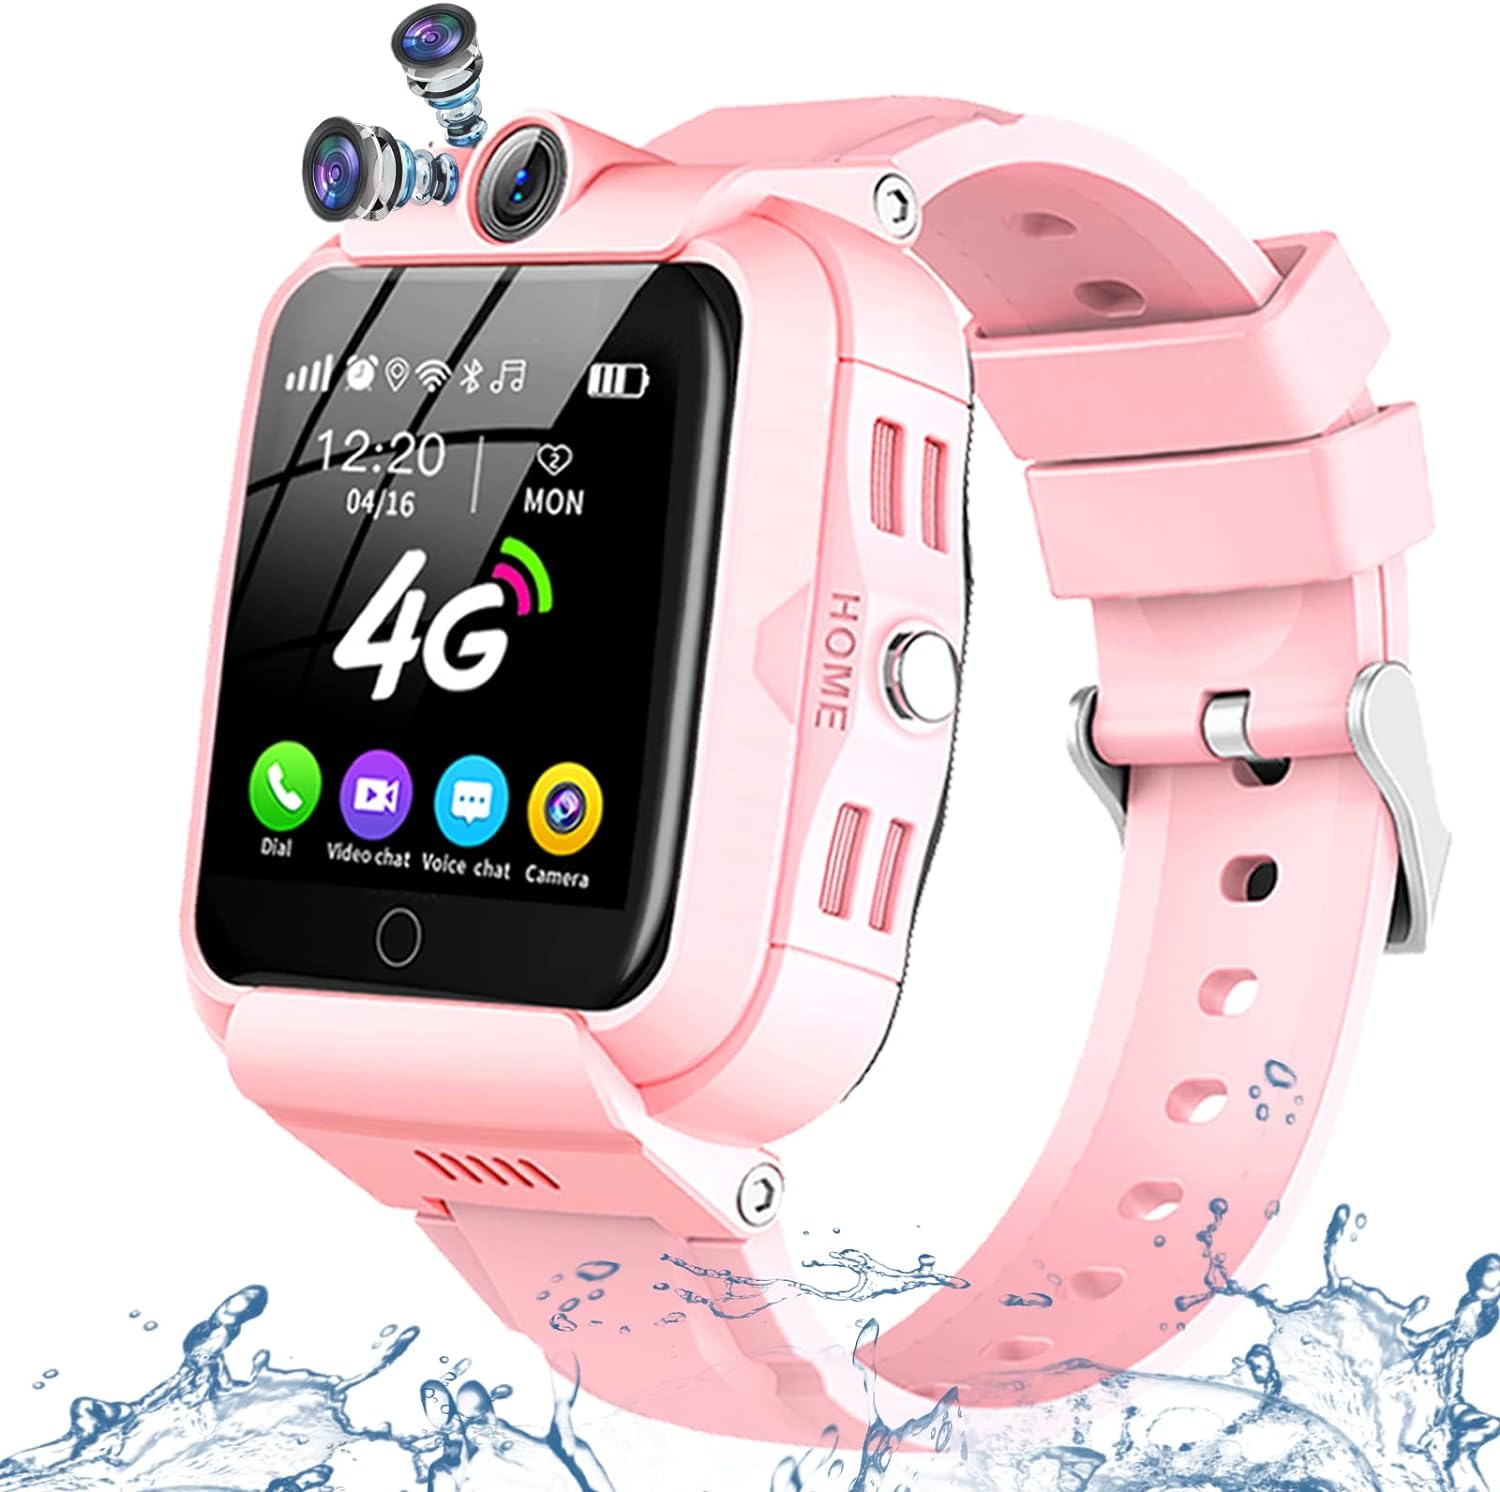 DDIOYIUR Kids Smart Watch, 4G GPS Tracker Child Phone Smartwatch with WiFi, SMS, Call,Voice Video Chat,Bluetooth,Alarm,Pedometer, Wrist Watch Suitable for 4-16 Boys Girls Birthday Gifts.